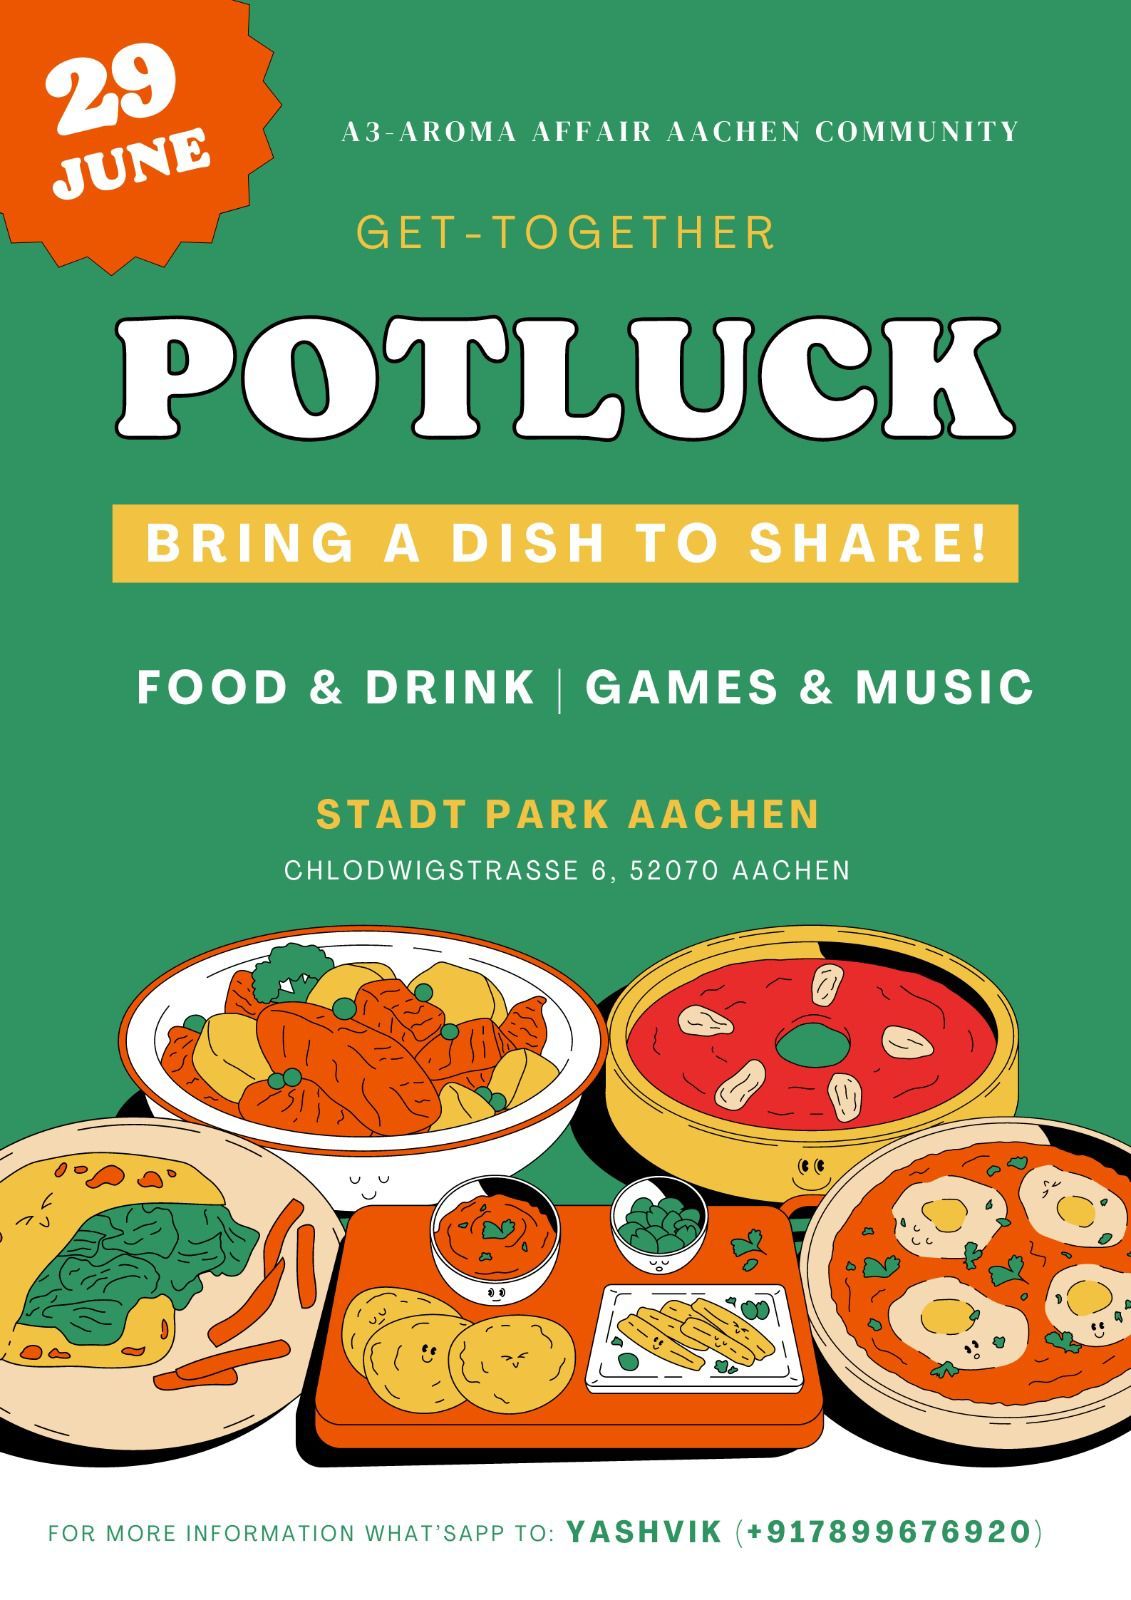 Potluck event by 'Aroma Affair Aachen' community.